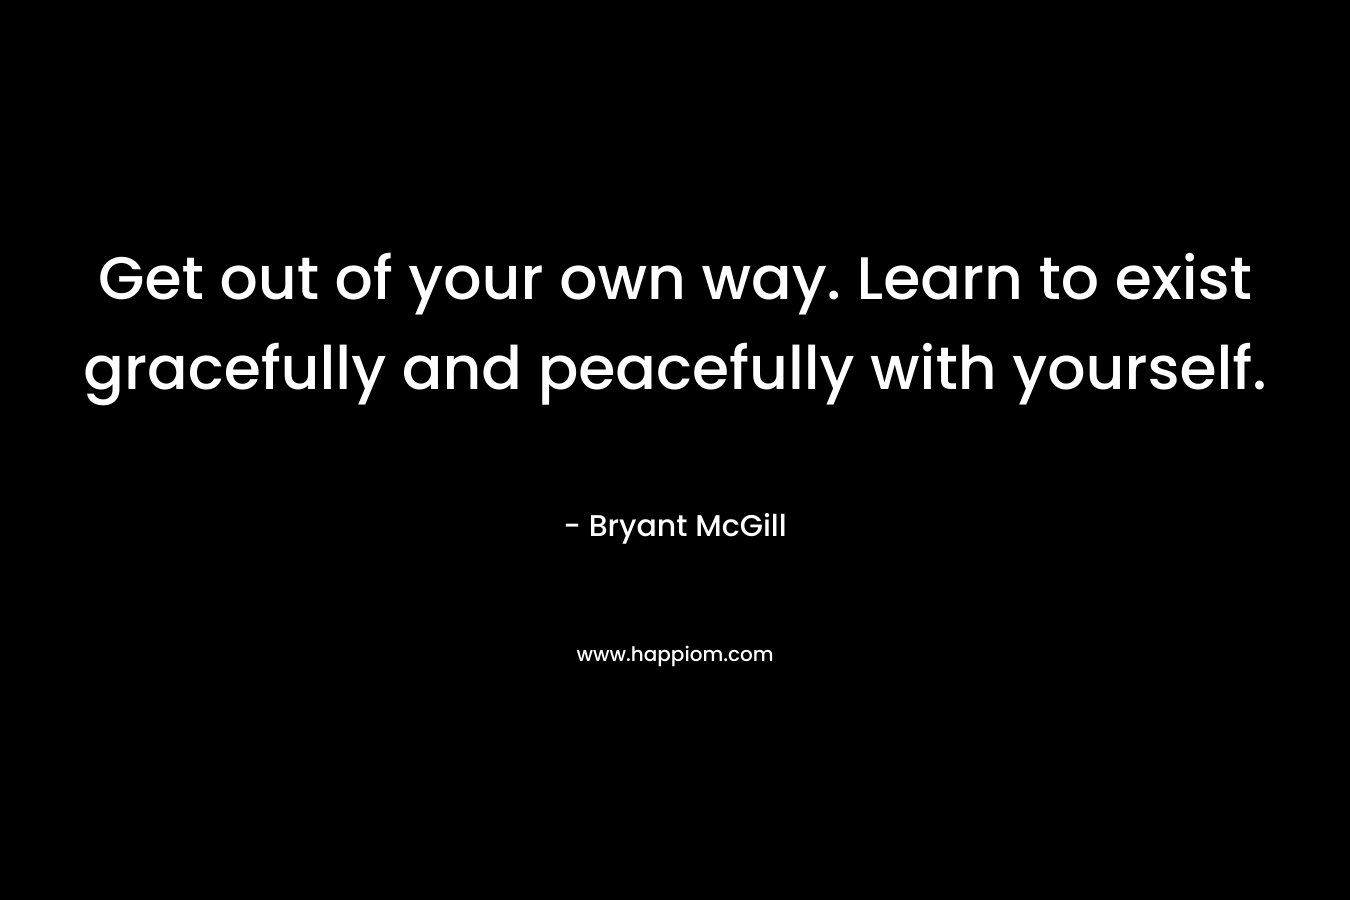 Get out of your own way. Learn to exist gracefully and peacefully with yourself.